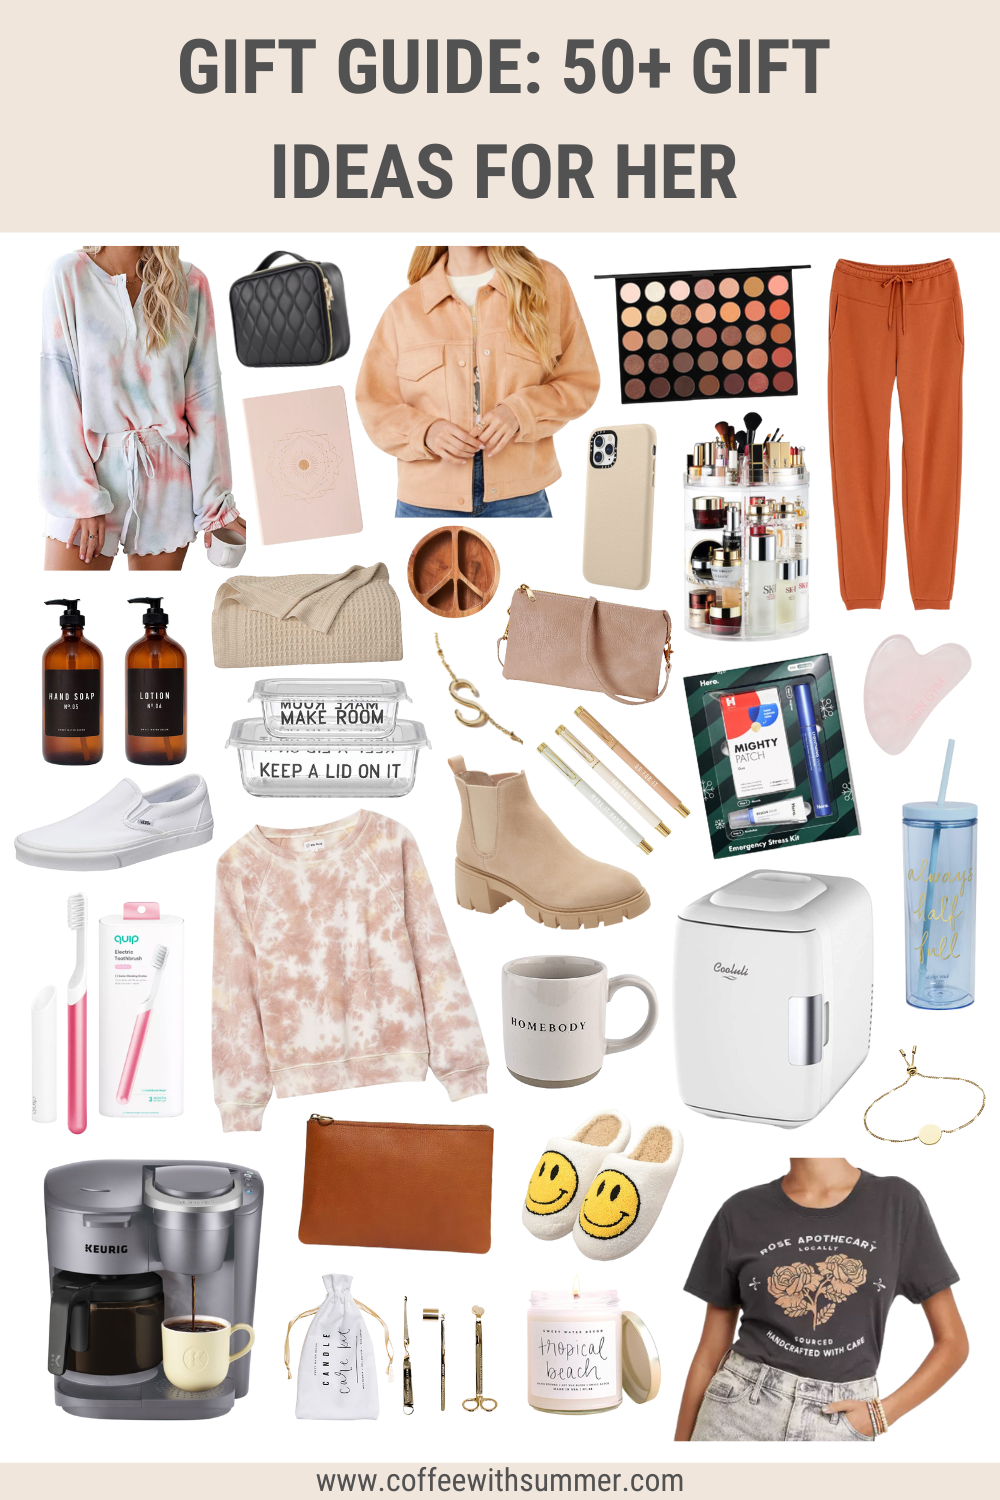 Holiday Gift Guide: home gift ideas - une femme d'un certain âge